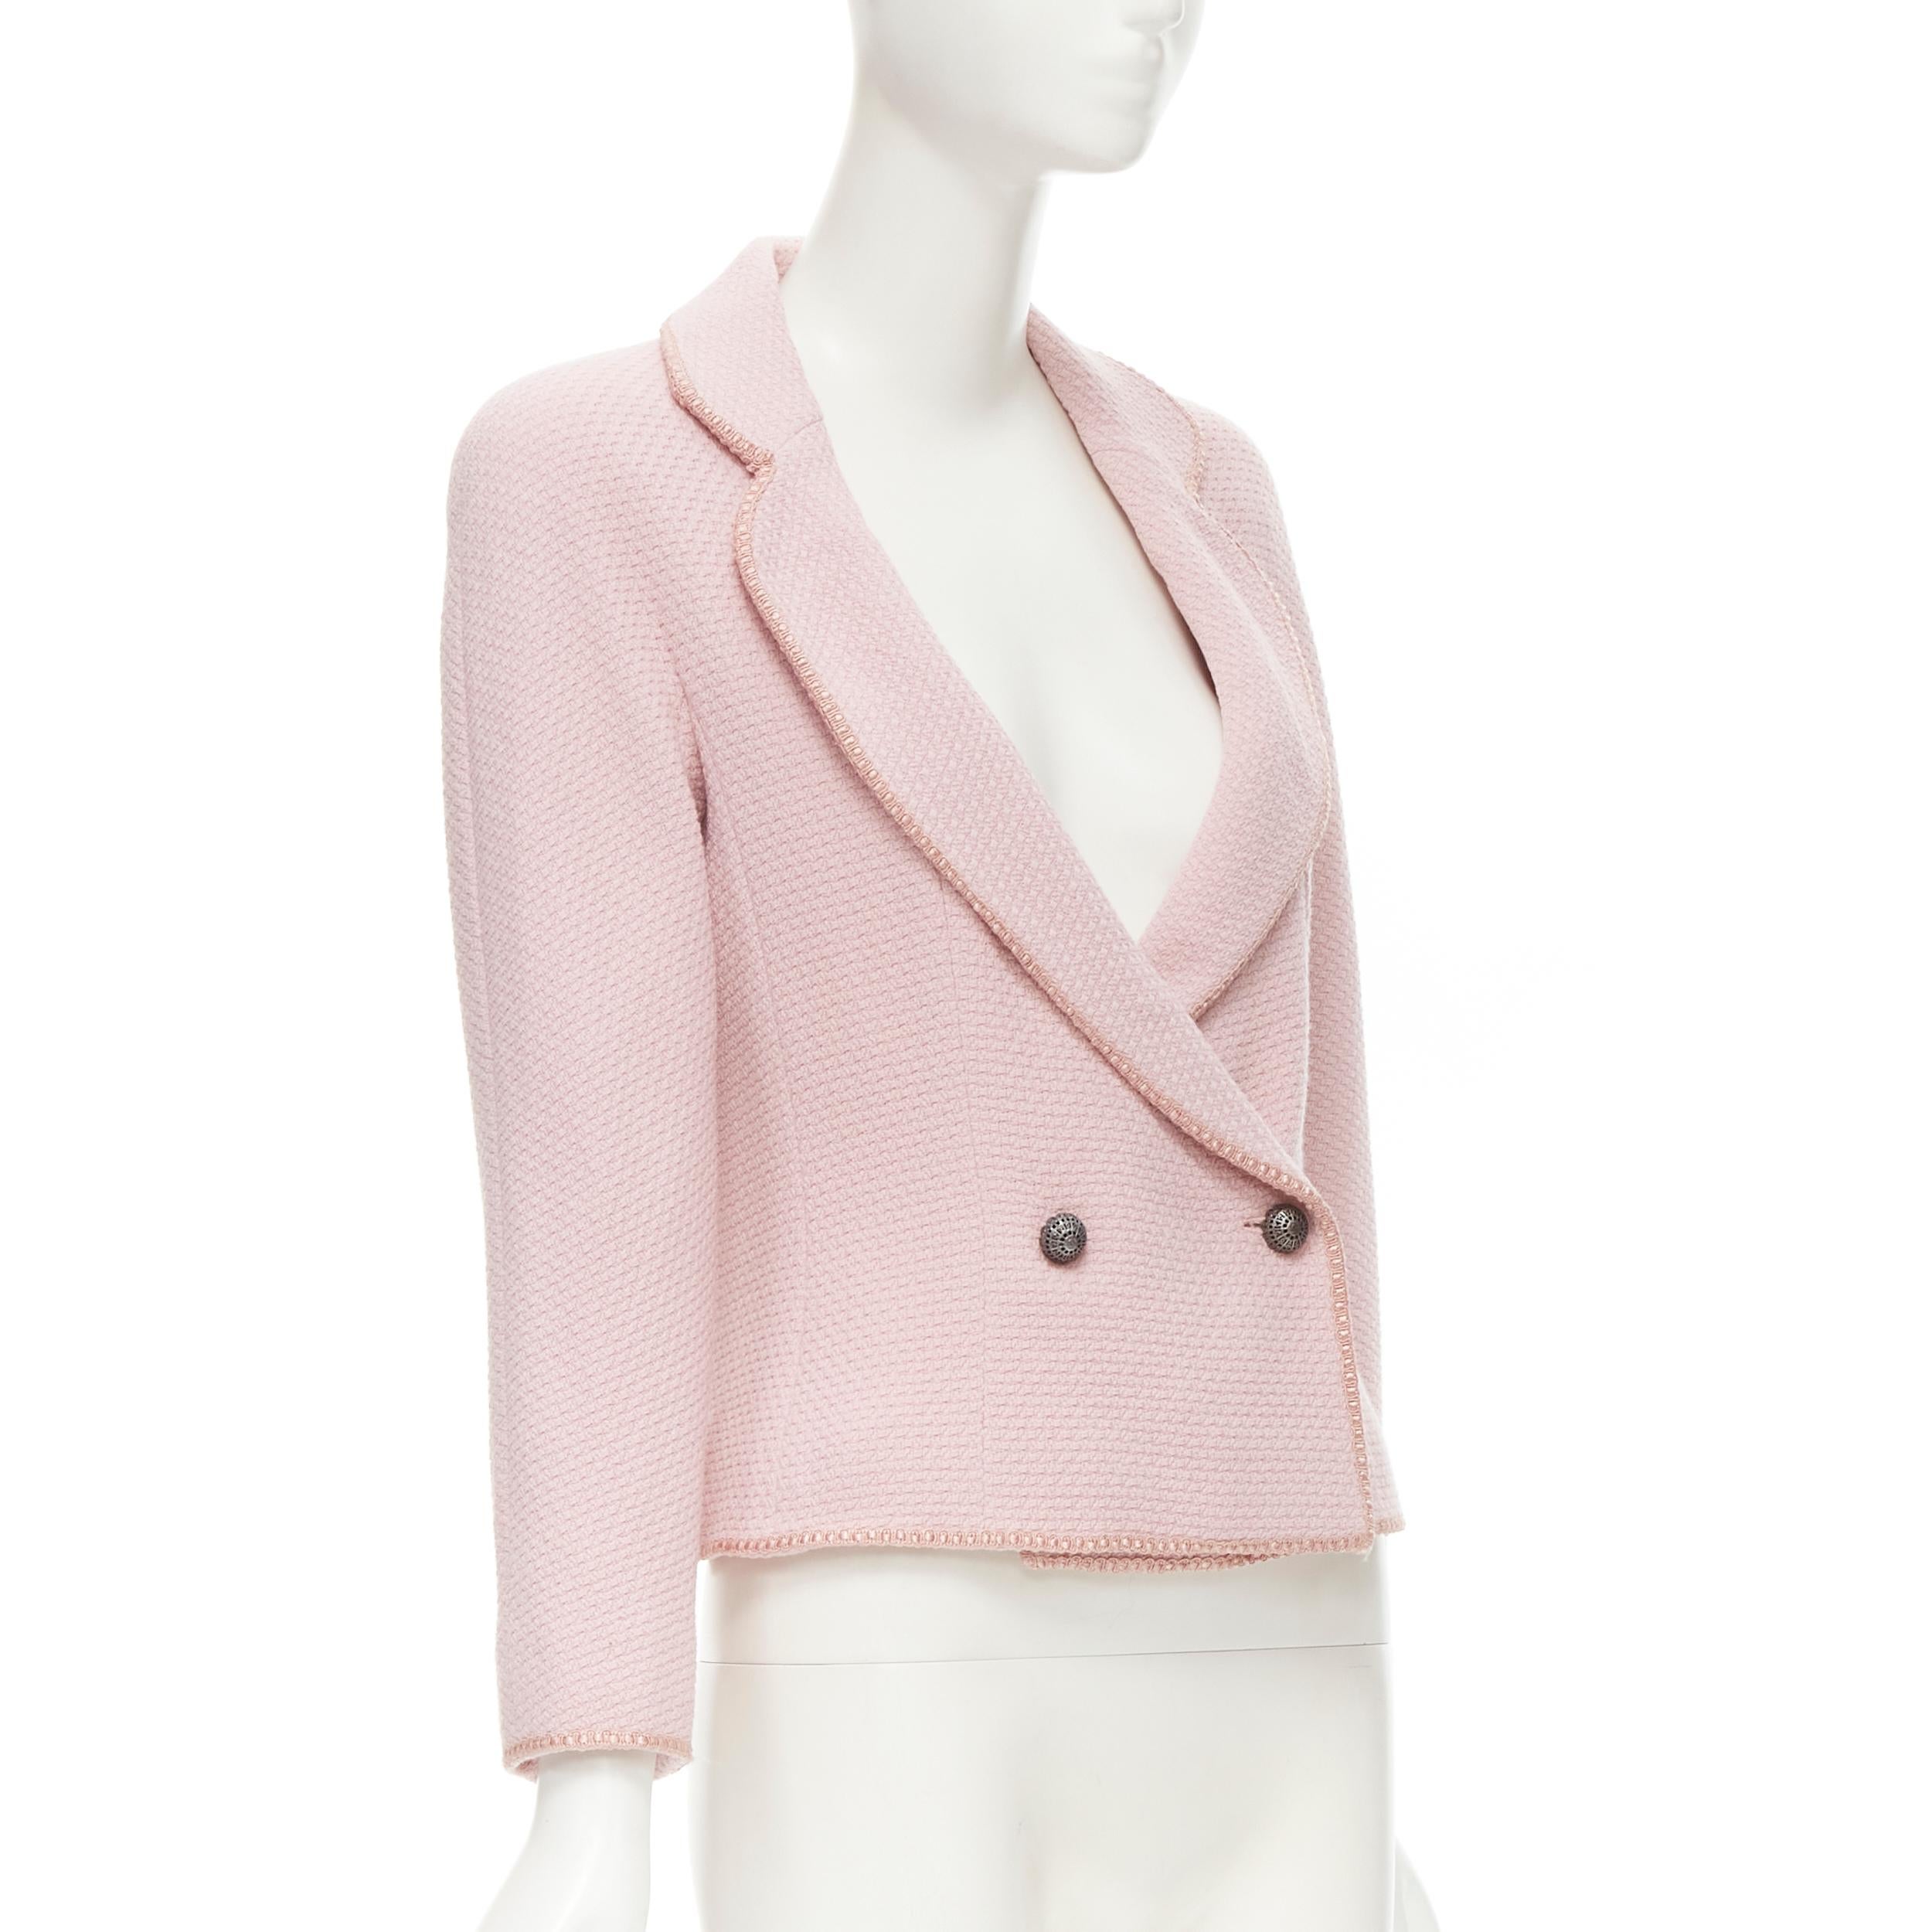 CHRISTIAN DIOR 1997 Runway John Galliano pink tweed ribbon trimmed jacket FR42 L 
Reference: JYLM/A00020 
Brand: Christian Dior 
Designer: John Galliano 
Collection: 1997 
Material: Wool 
Color: Pink 
Pattern: Solid 
Closure: Button 
Extra Detail: